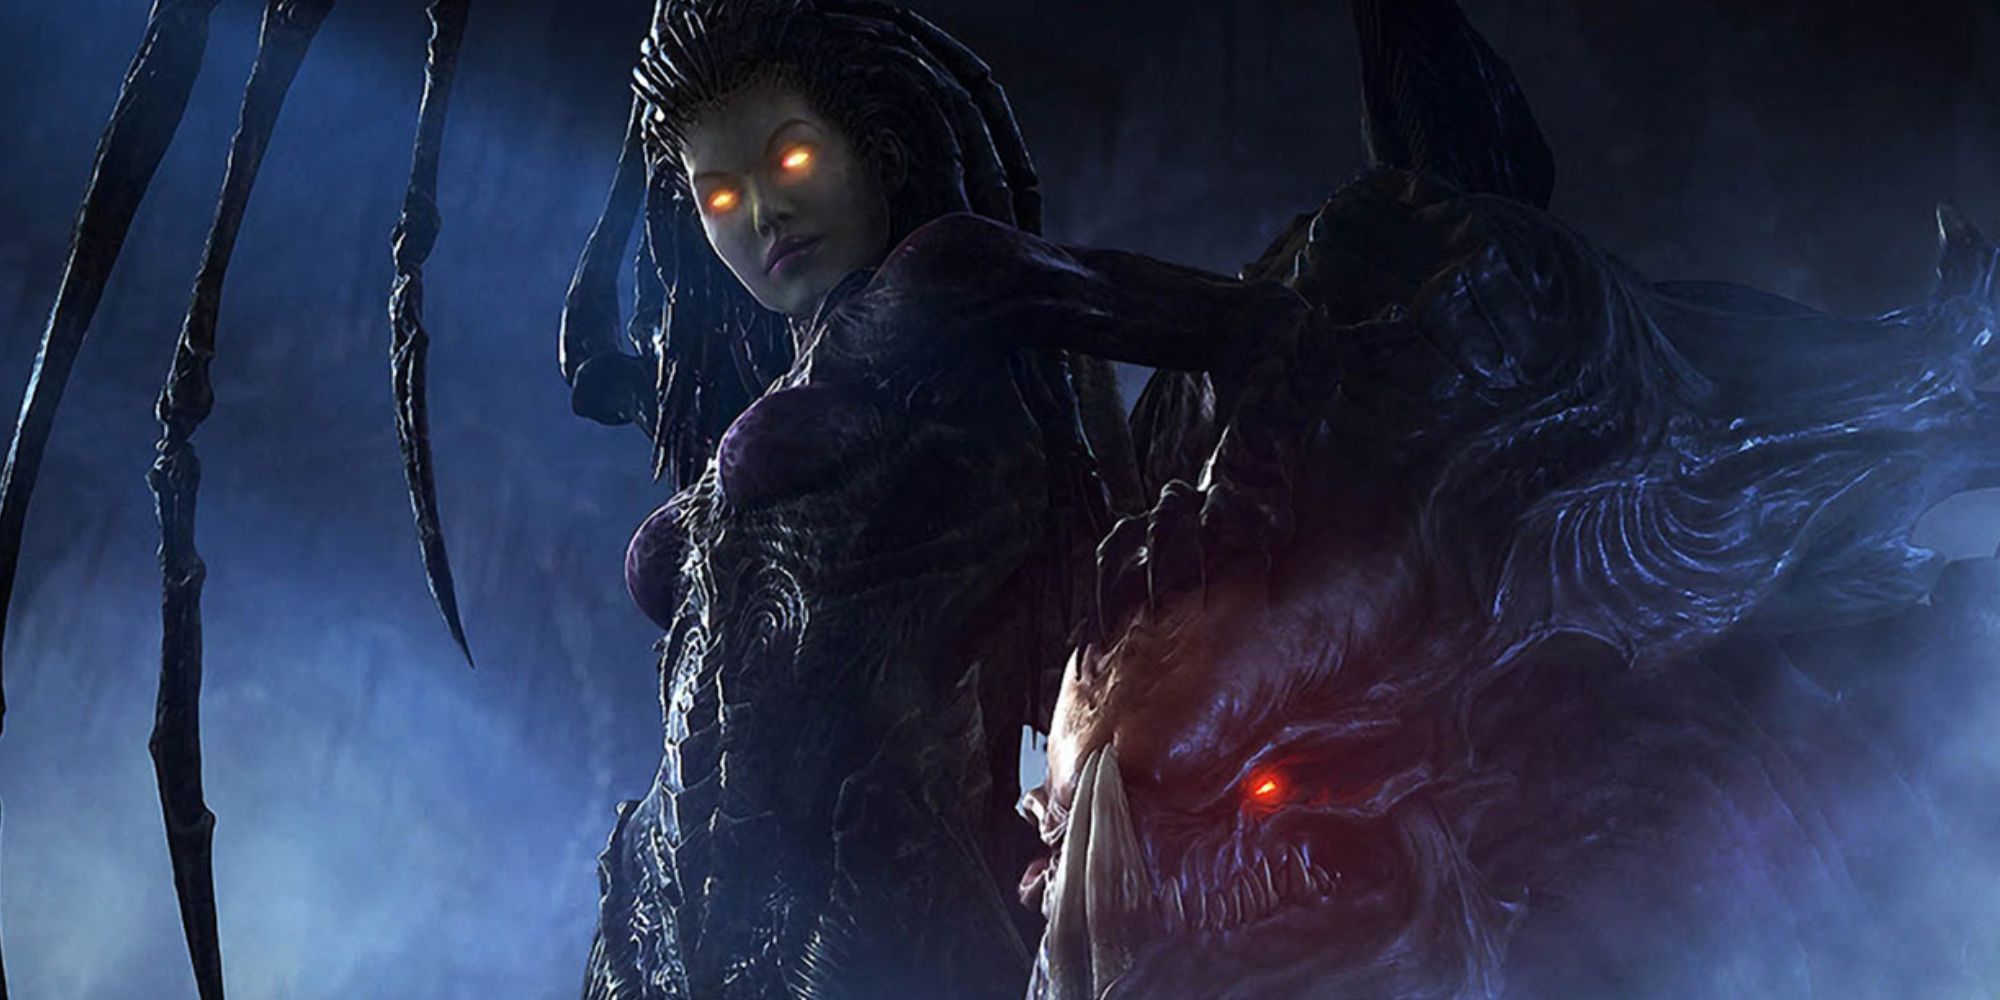 Kerrigan from the story of Starcraft 2